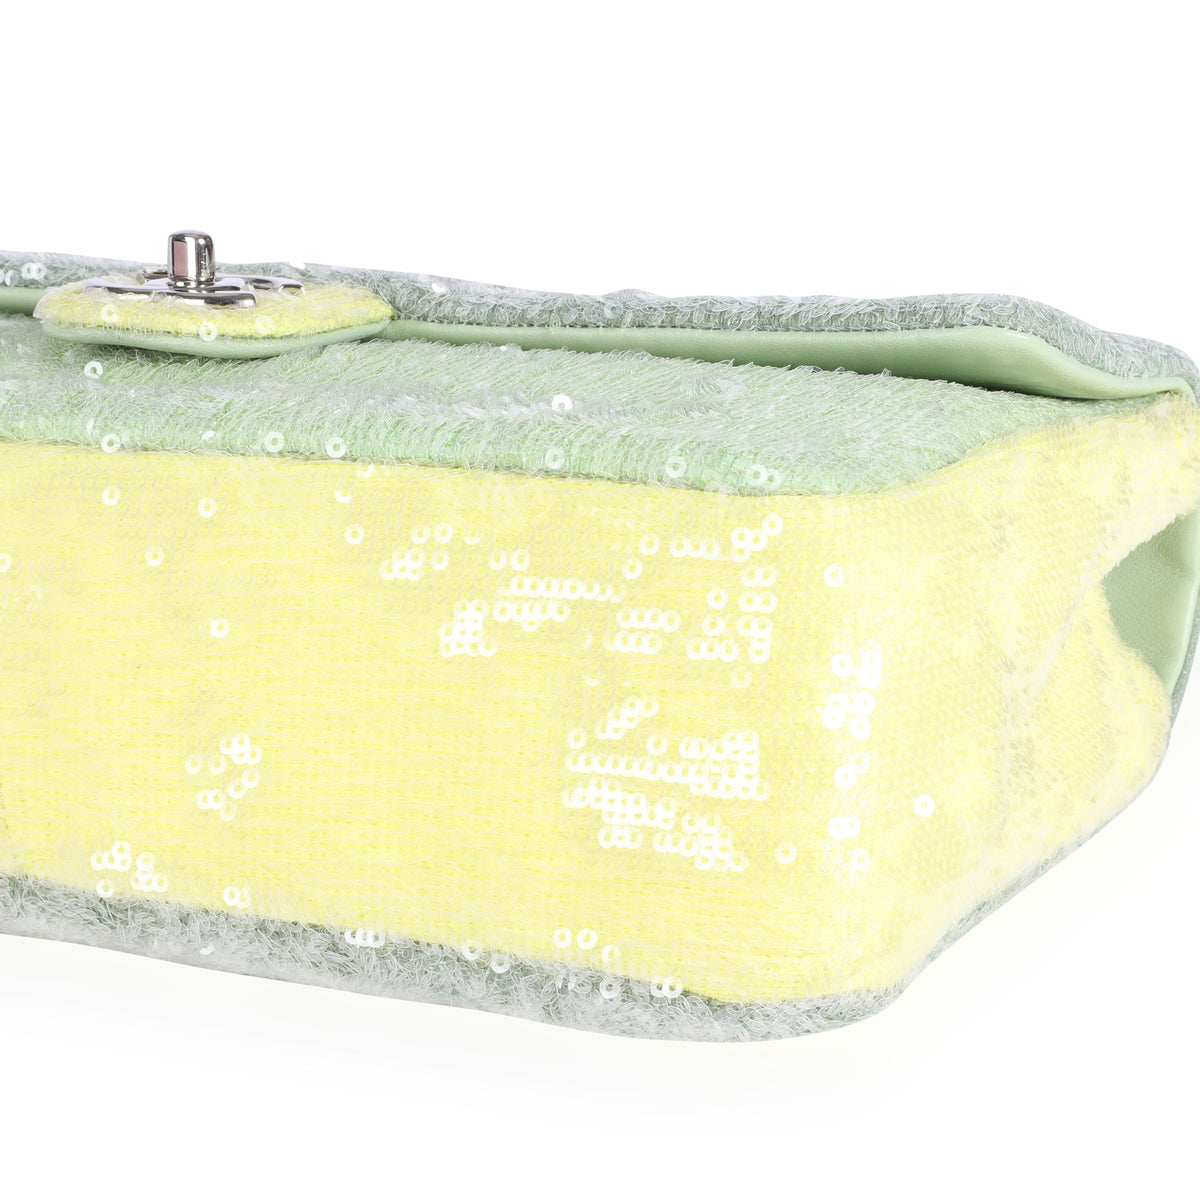 Chanel Green & Yellow Sequin Large Waterfall Flap Bag, myGemma